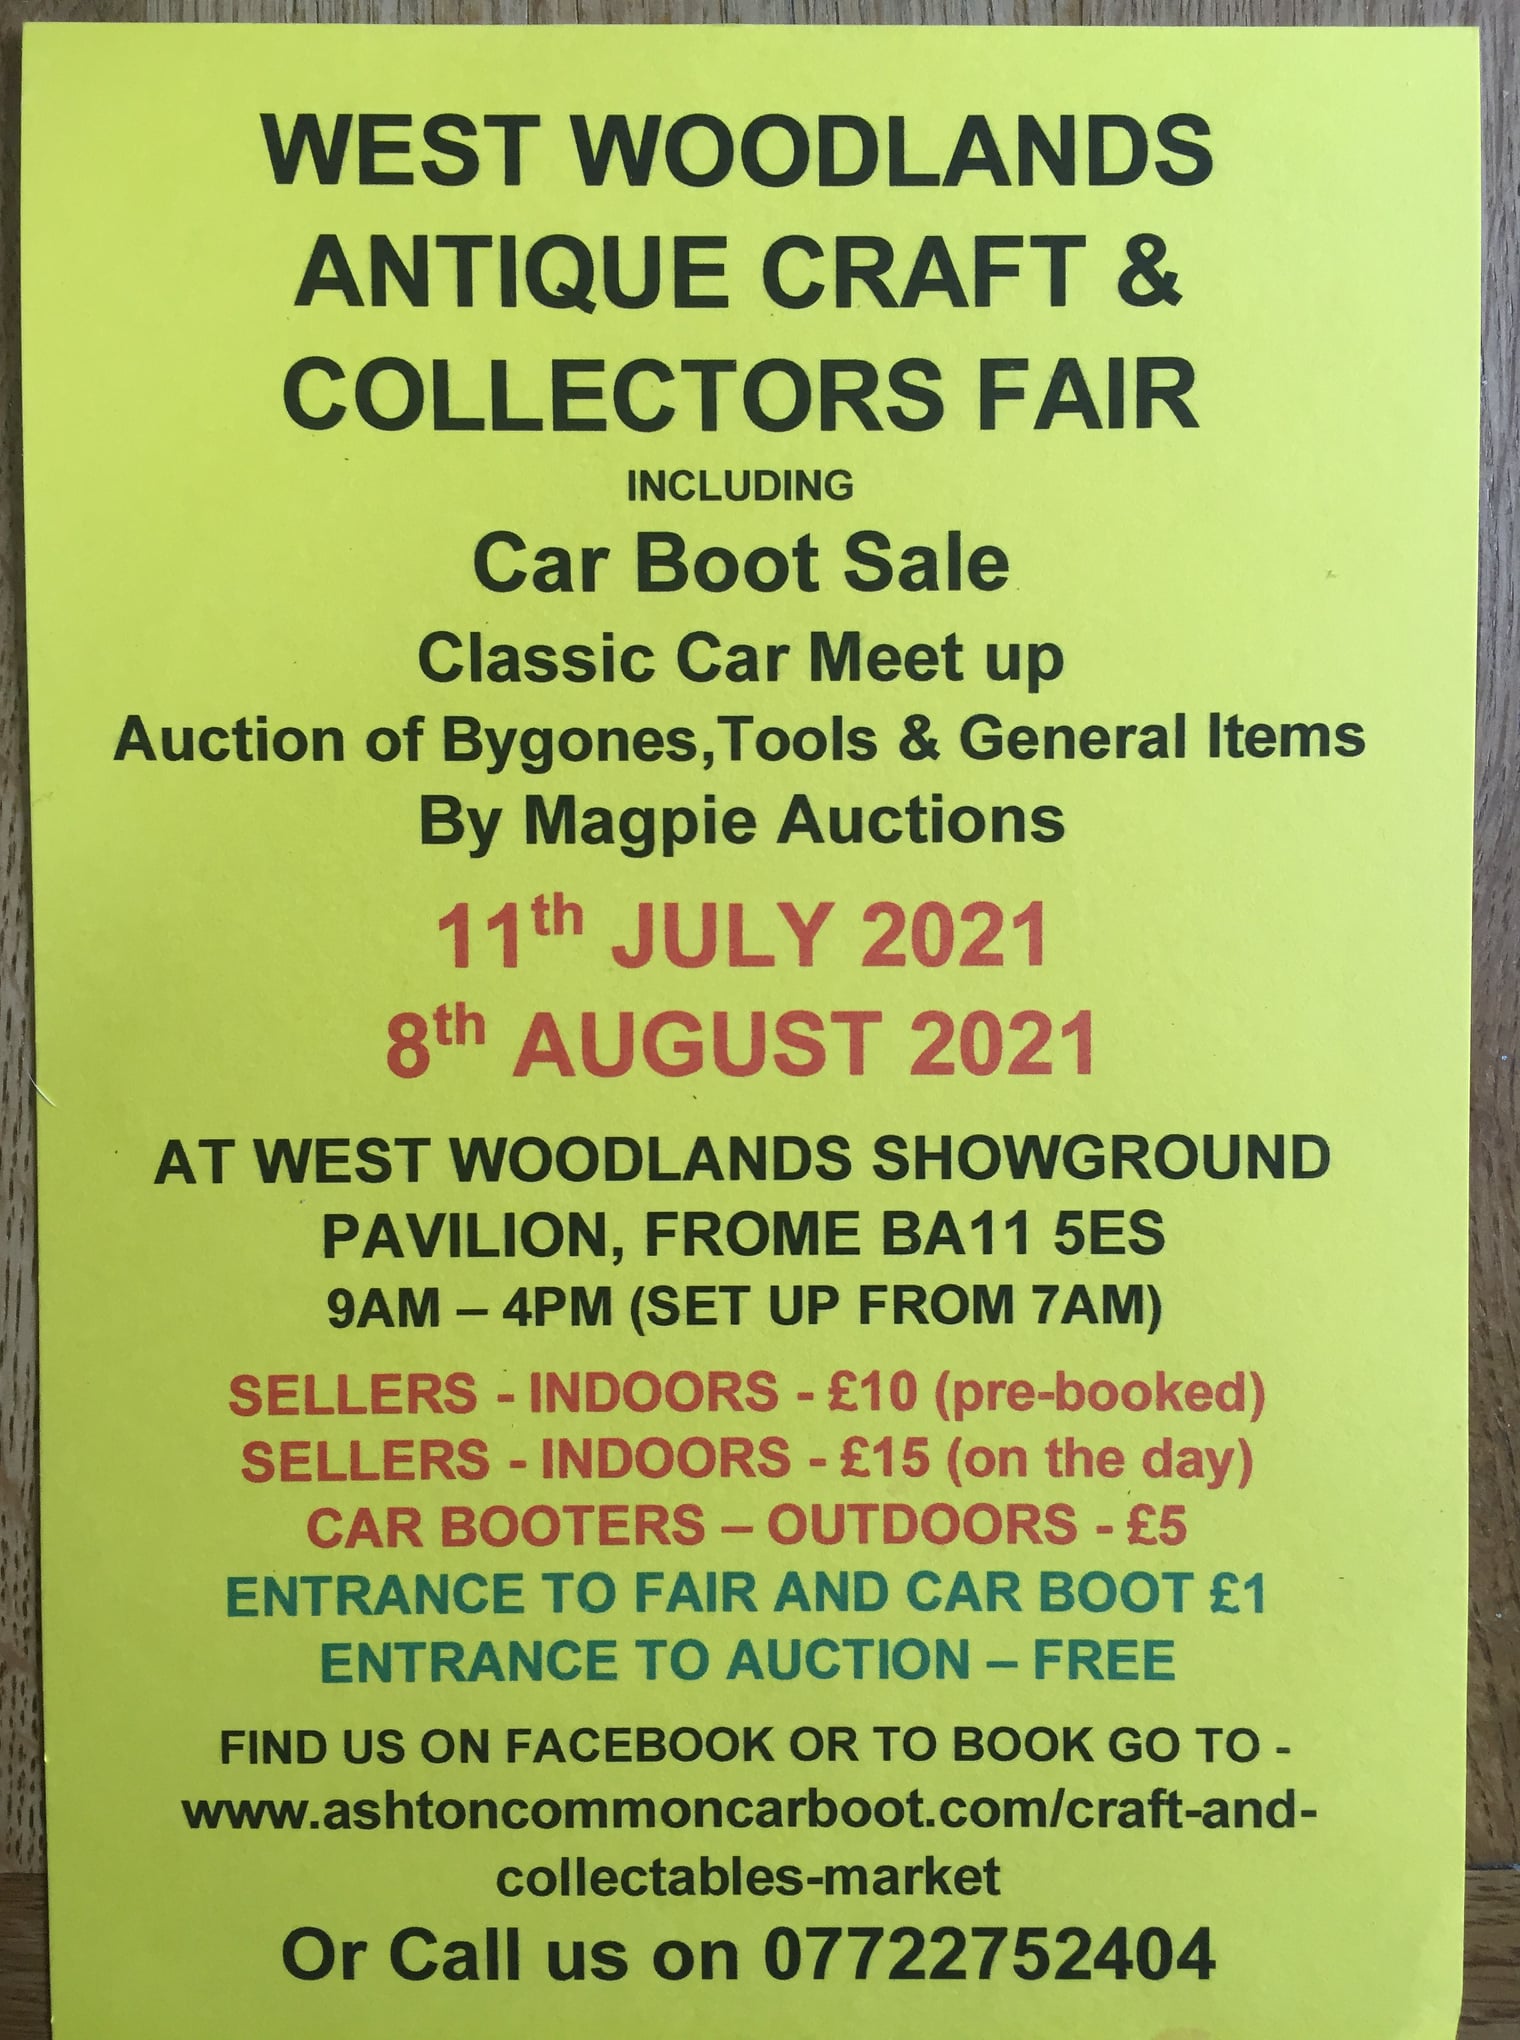 West Woodlands Antique Craft & Collectors Fair Discover Frome